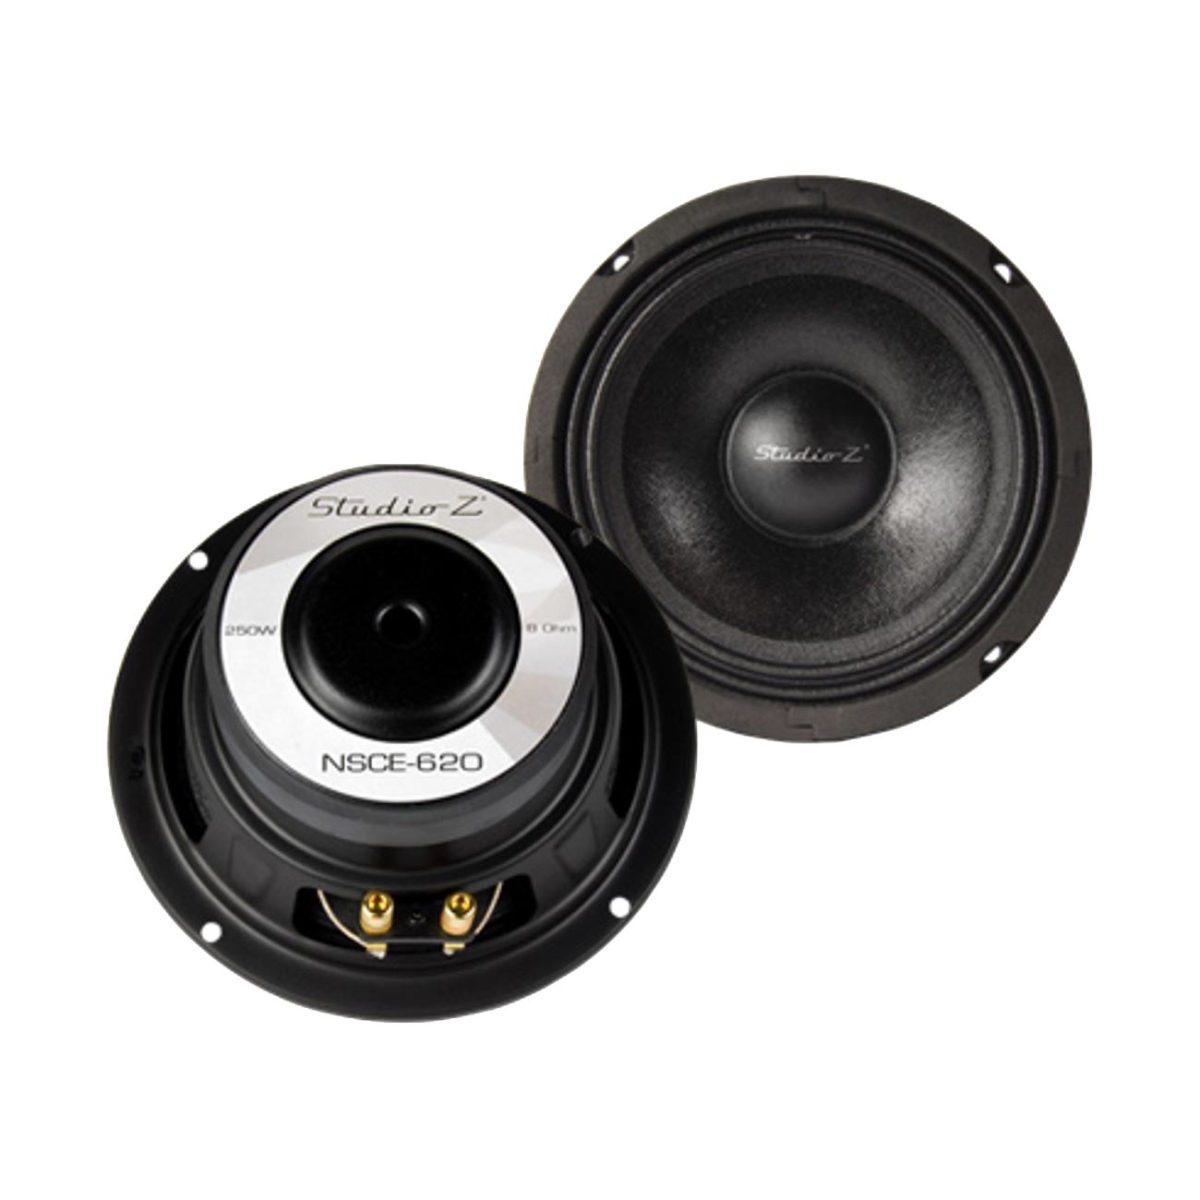 Picture of Nippon NSCE620 6 in. Studio Z 250W Max 8 Ohm Woofer with 1 in. Aluminum Voice Coil